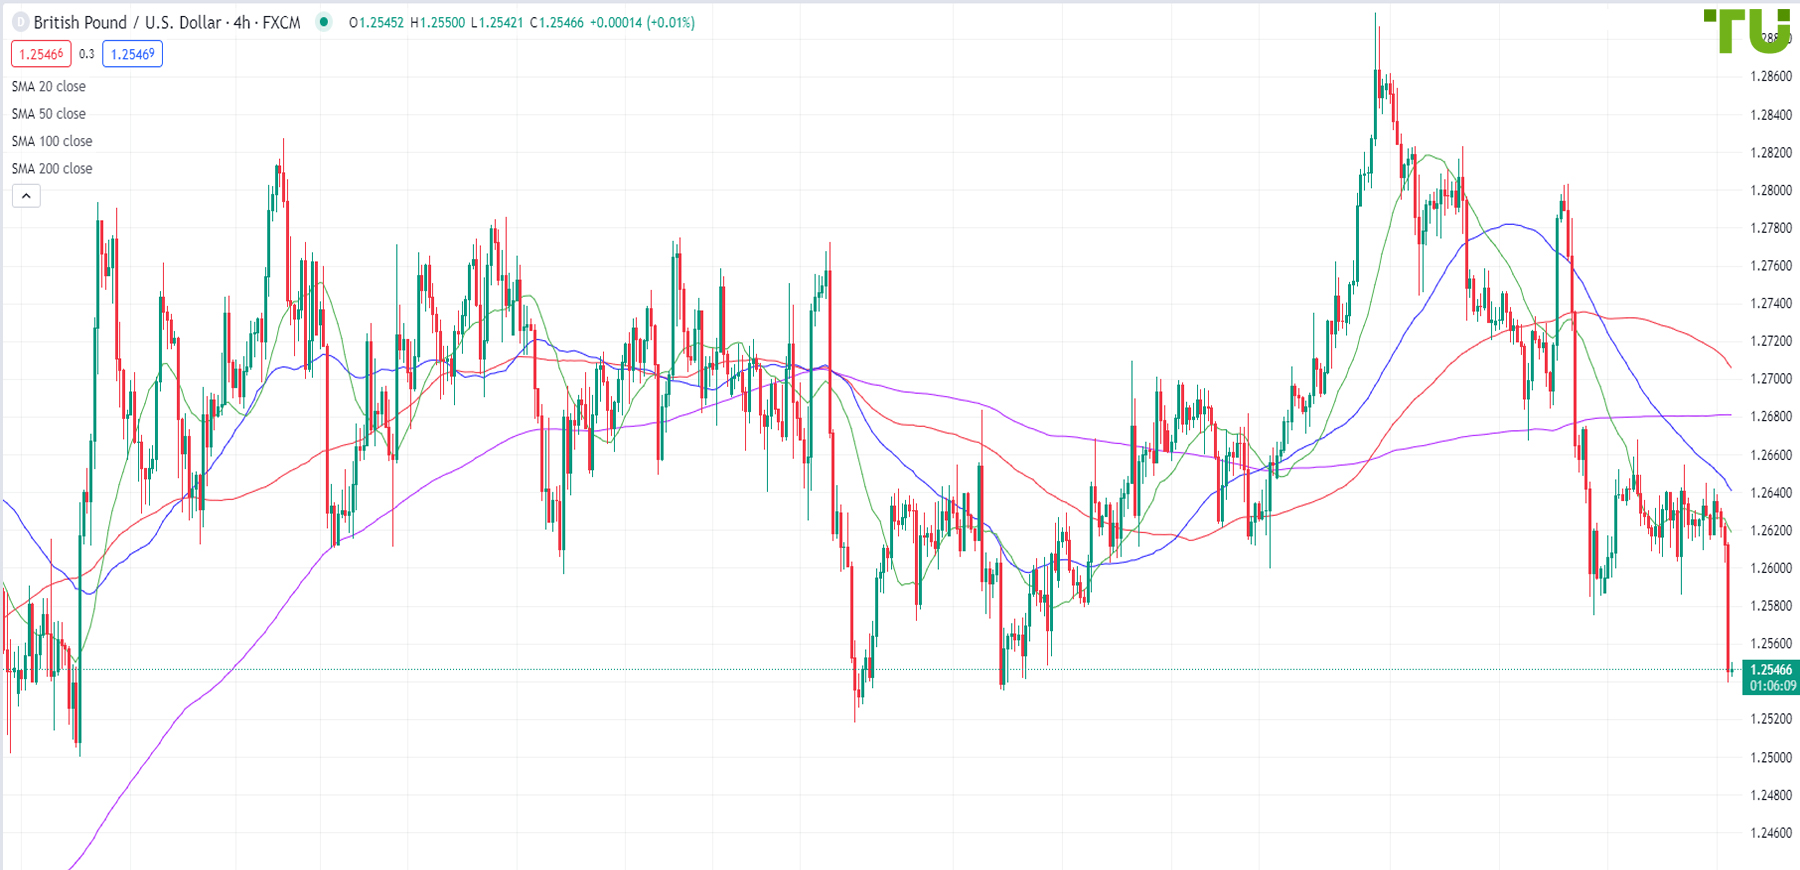 The pound/dollar broke support at 1.2580